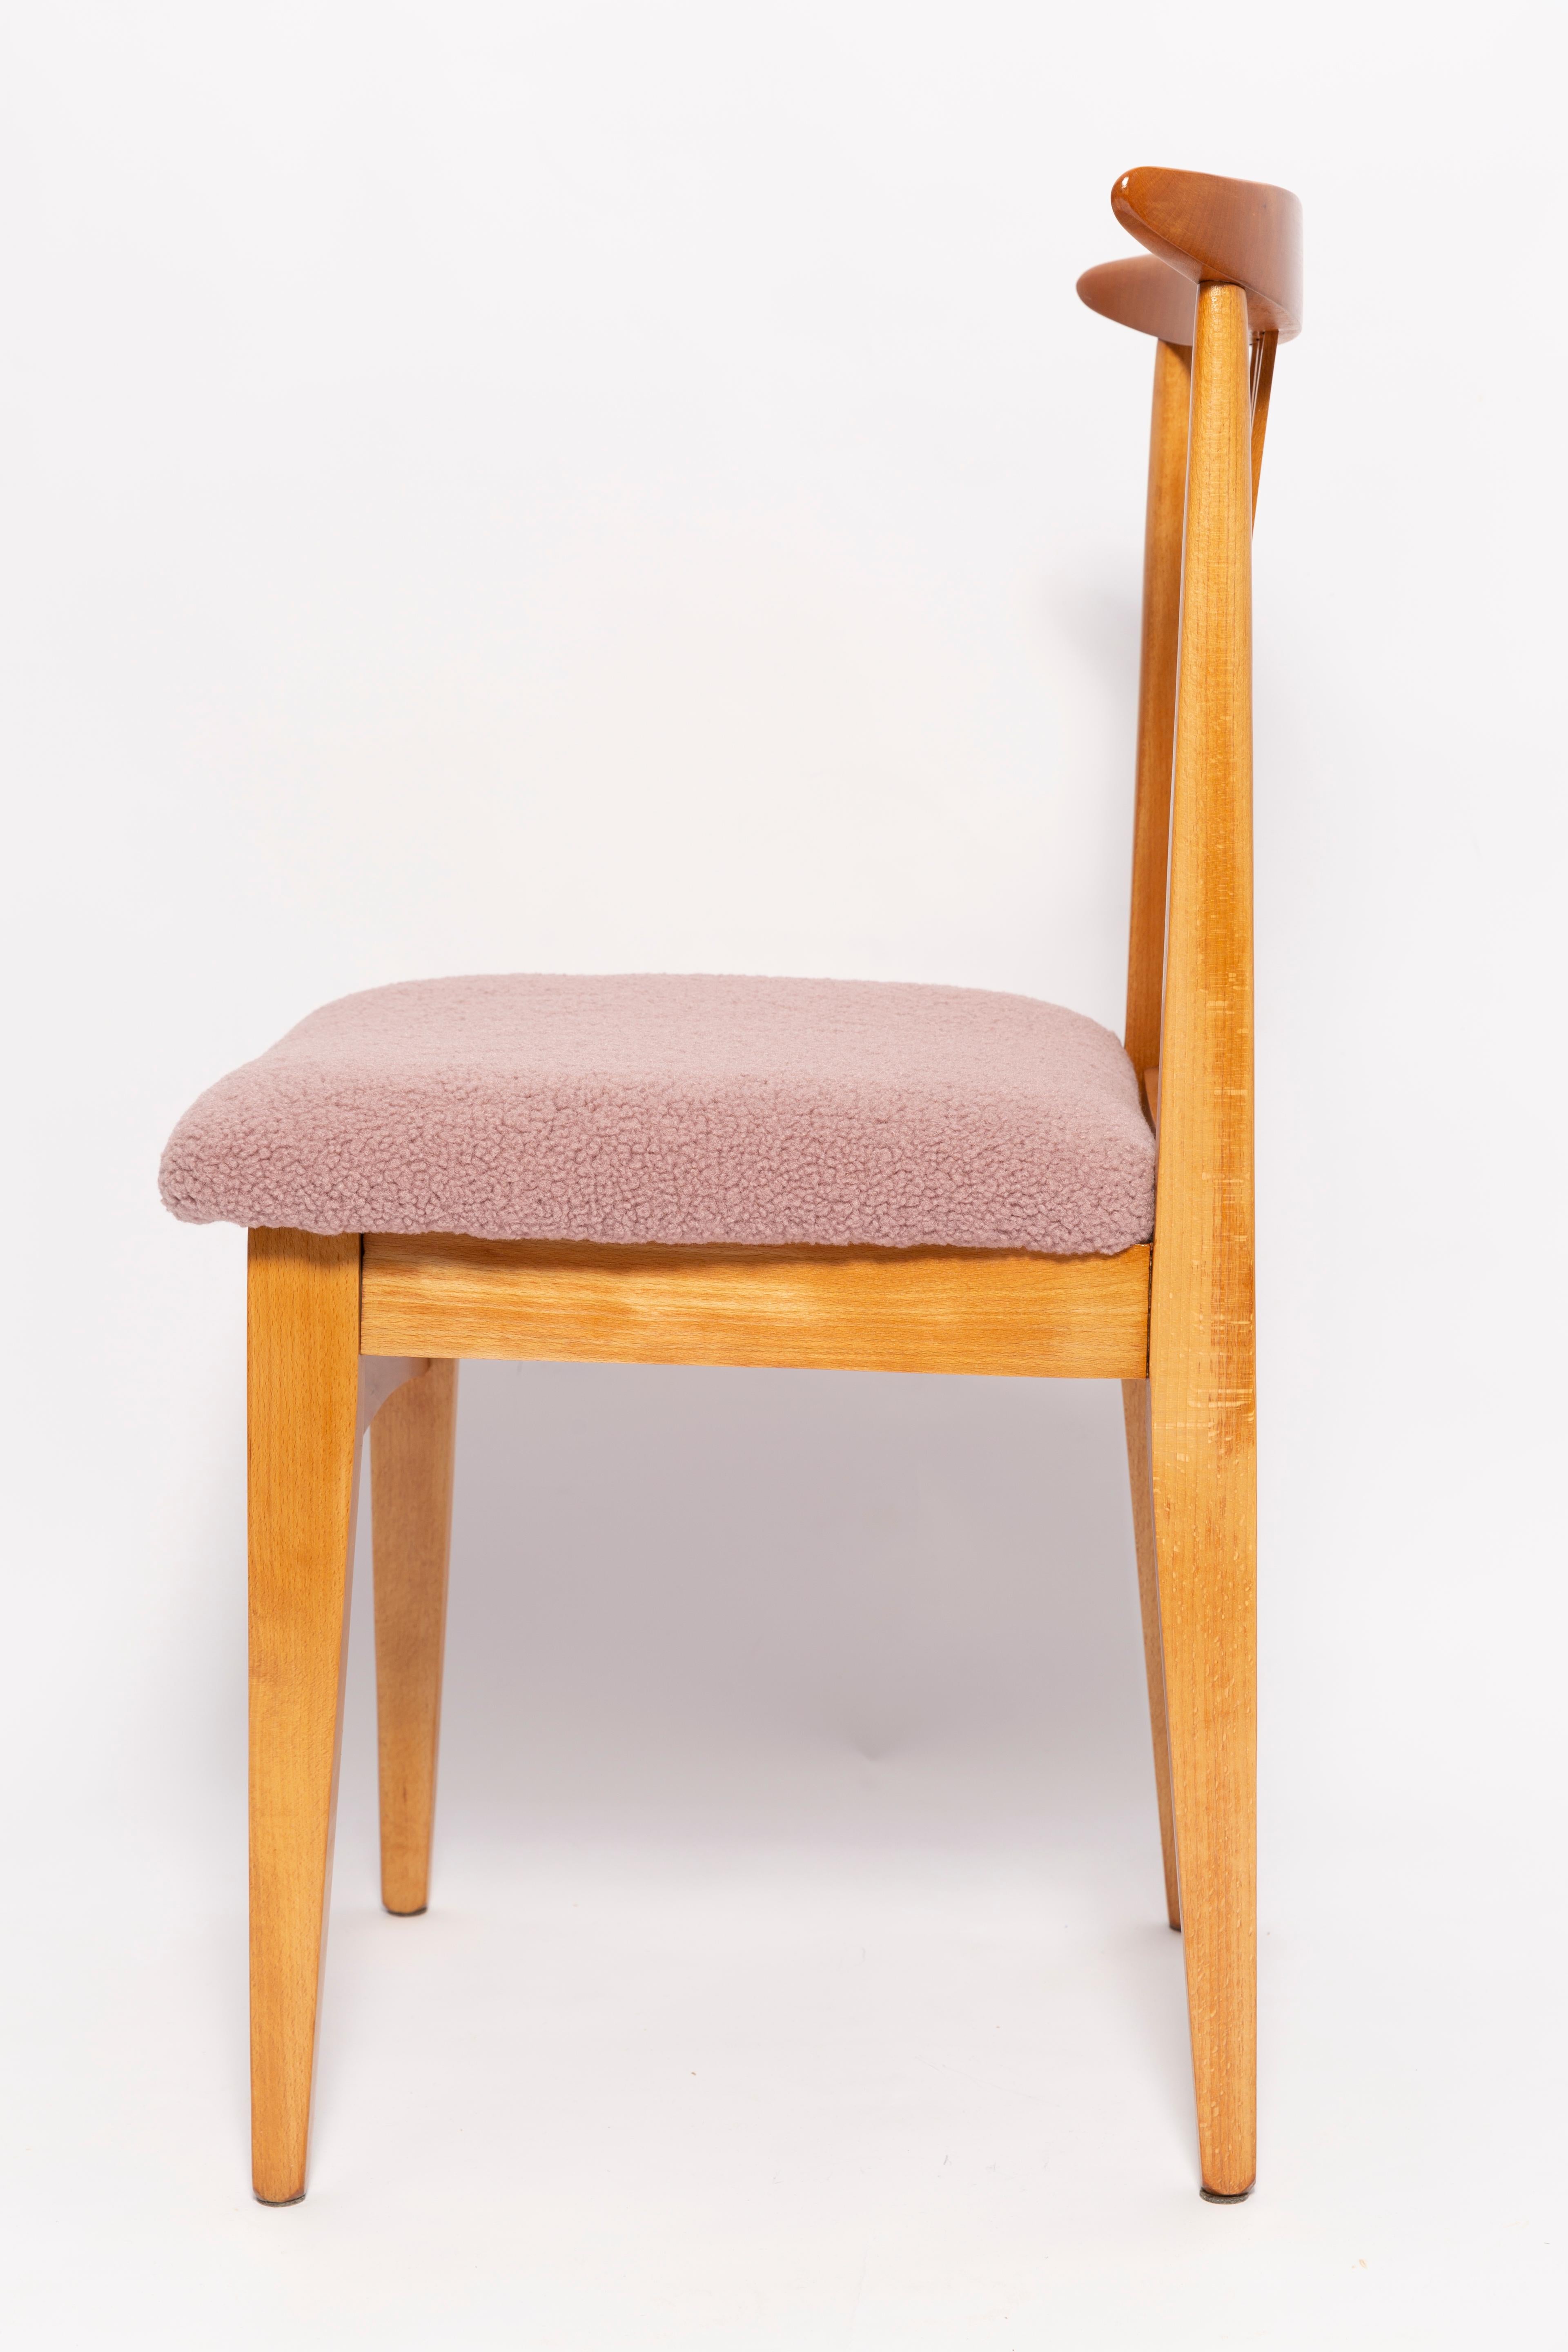 Mid-Century Modern Mid-Century Pink Blush Boucle Chair, Light Wood, by M. Zielinski, Europe, 1960s For Sale